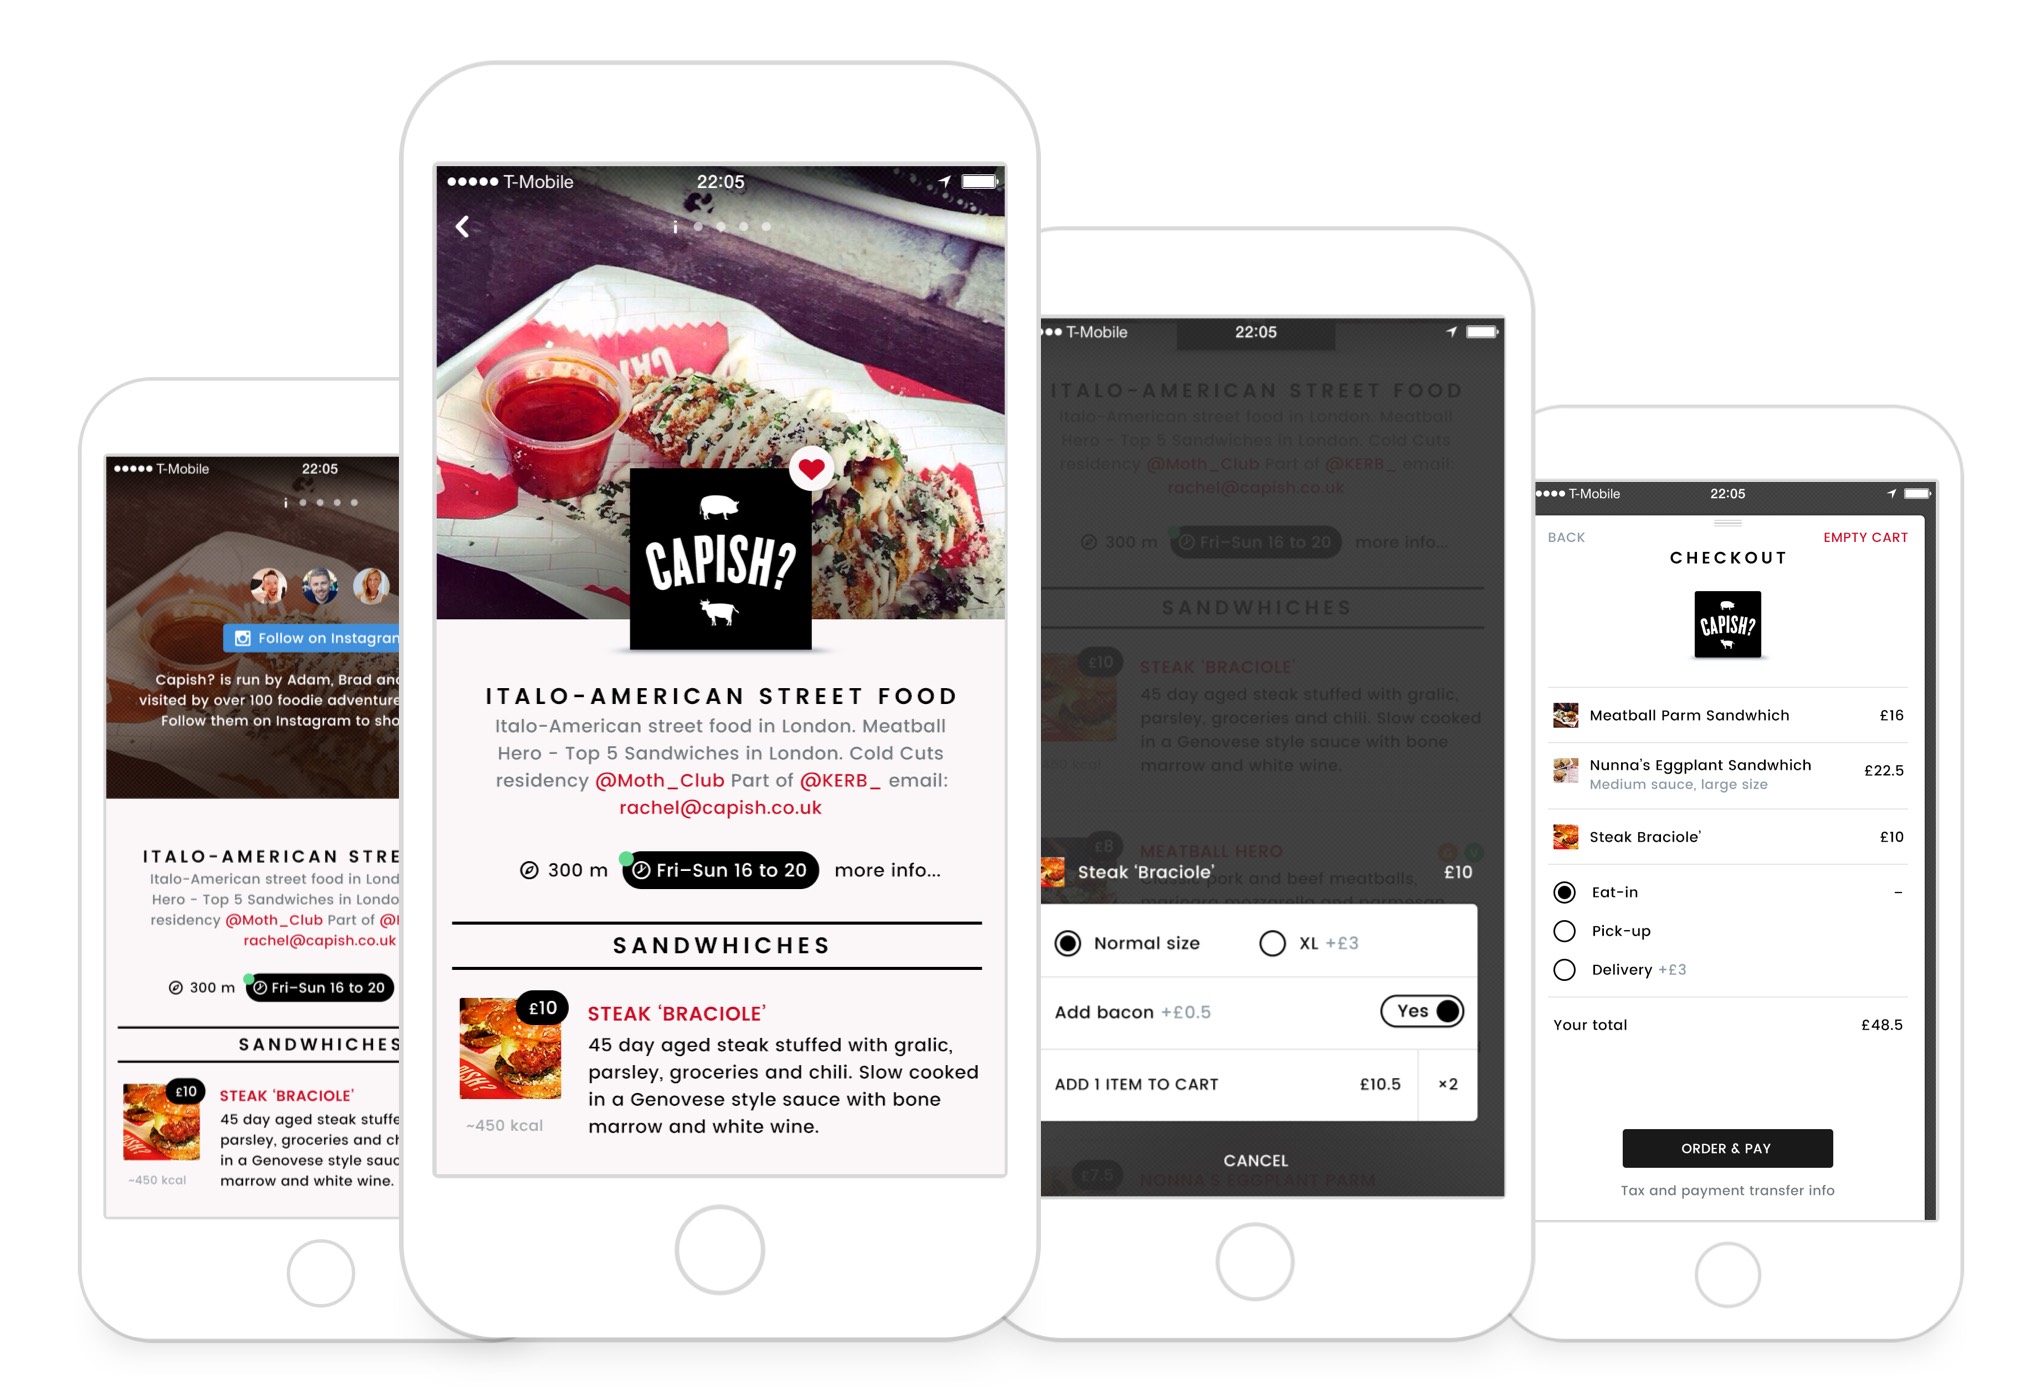 Meal checkout was one of the core flows we wanted to visualize in the MVP. We validated our solution by prototyping with real menus collected from various street food brands in London.